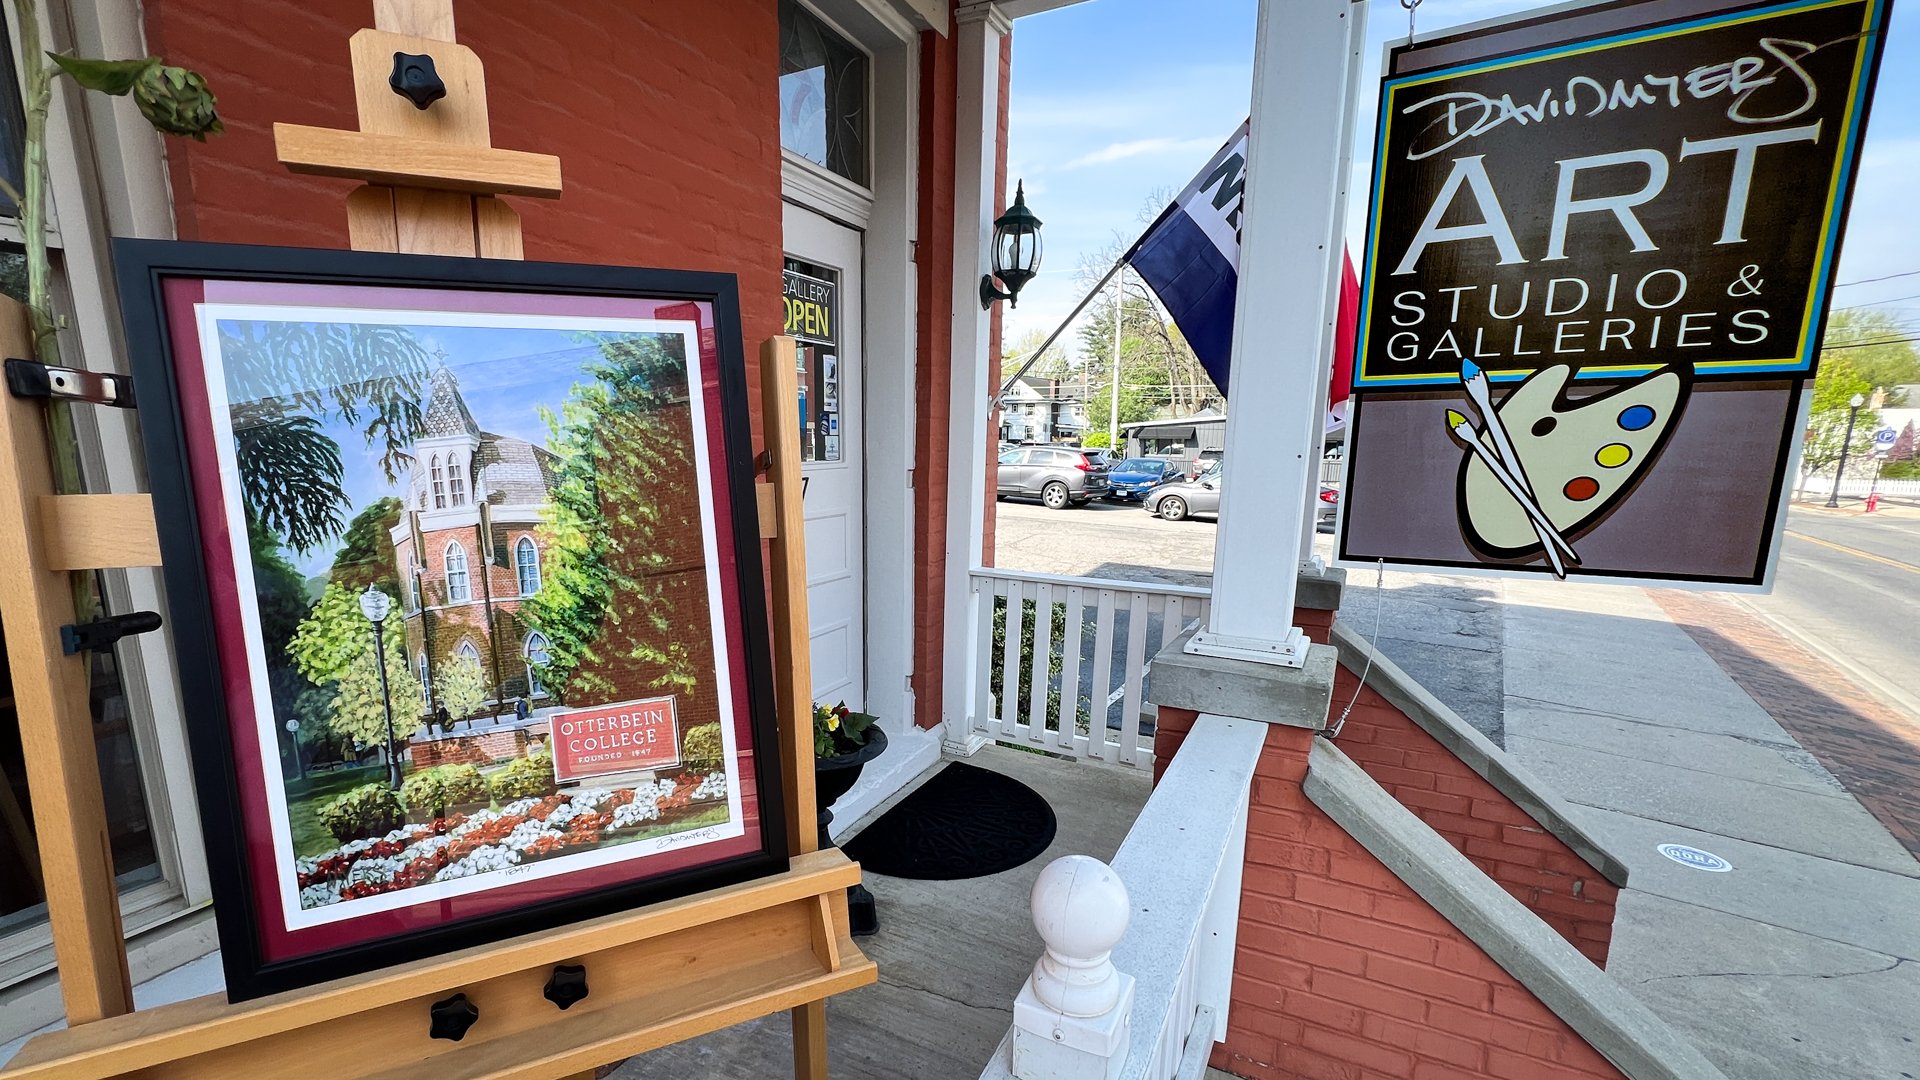 Congratulations Otterbein Graduates!

Archival lithographs, photographs and notecards available at the gallery until 2:00 today and noon-2:00 Sunday.

#Otterbein #ShopSmall  #ShopLocal #ArtintheHeartofUptown  #UptownWesterville #TowersHall #7WestMain